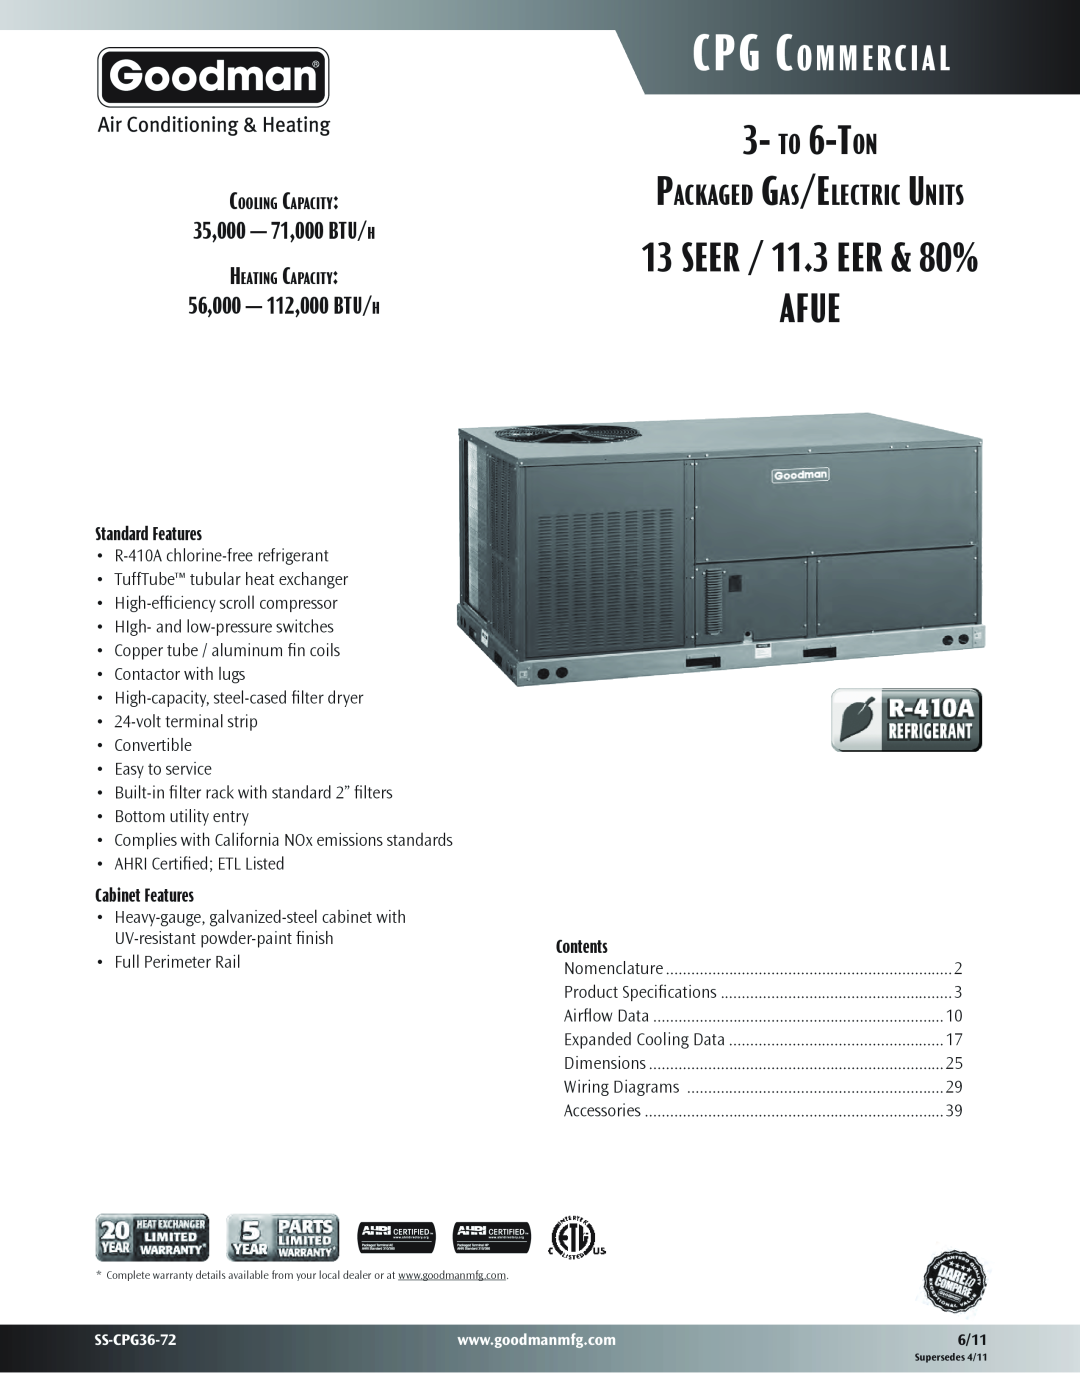 Goodman Mfg SS-CPG36-72 warranty Standard Features, Cabinet Features, Contents, to 6-Ton, Afue, CPG Commercial 